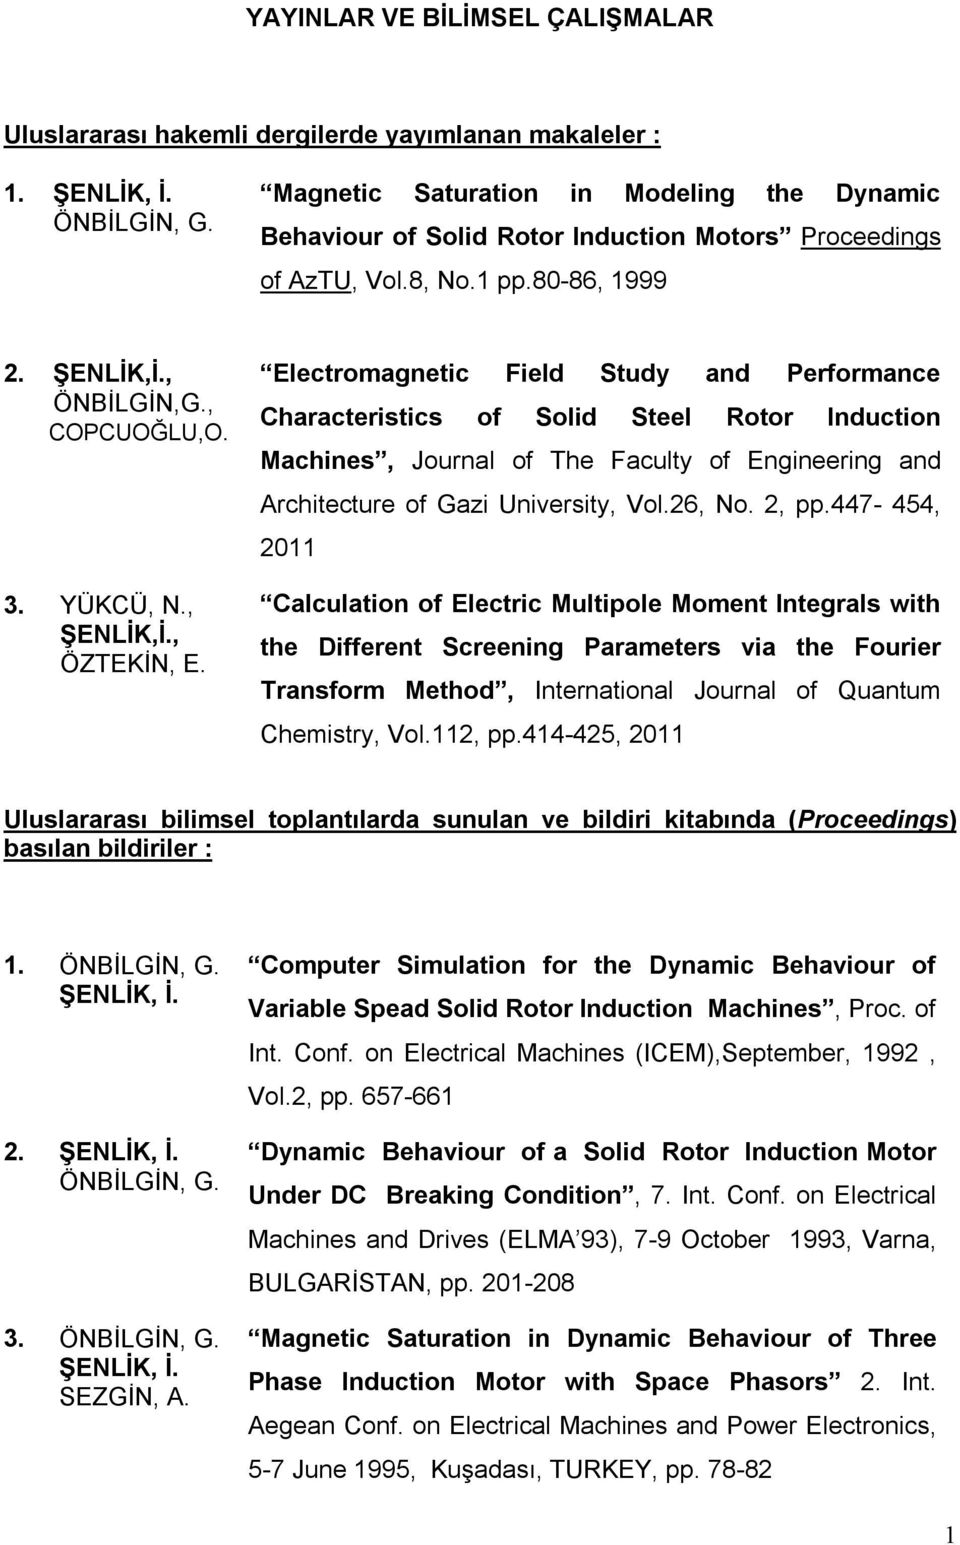 Electromagnetic Field Study and Performance Characteristics of Solid Steel Rotor Induction Machines, Journal of The Faculty of Engineering and Architecture of Gazi University, Vol.26, No. 2, pp.